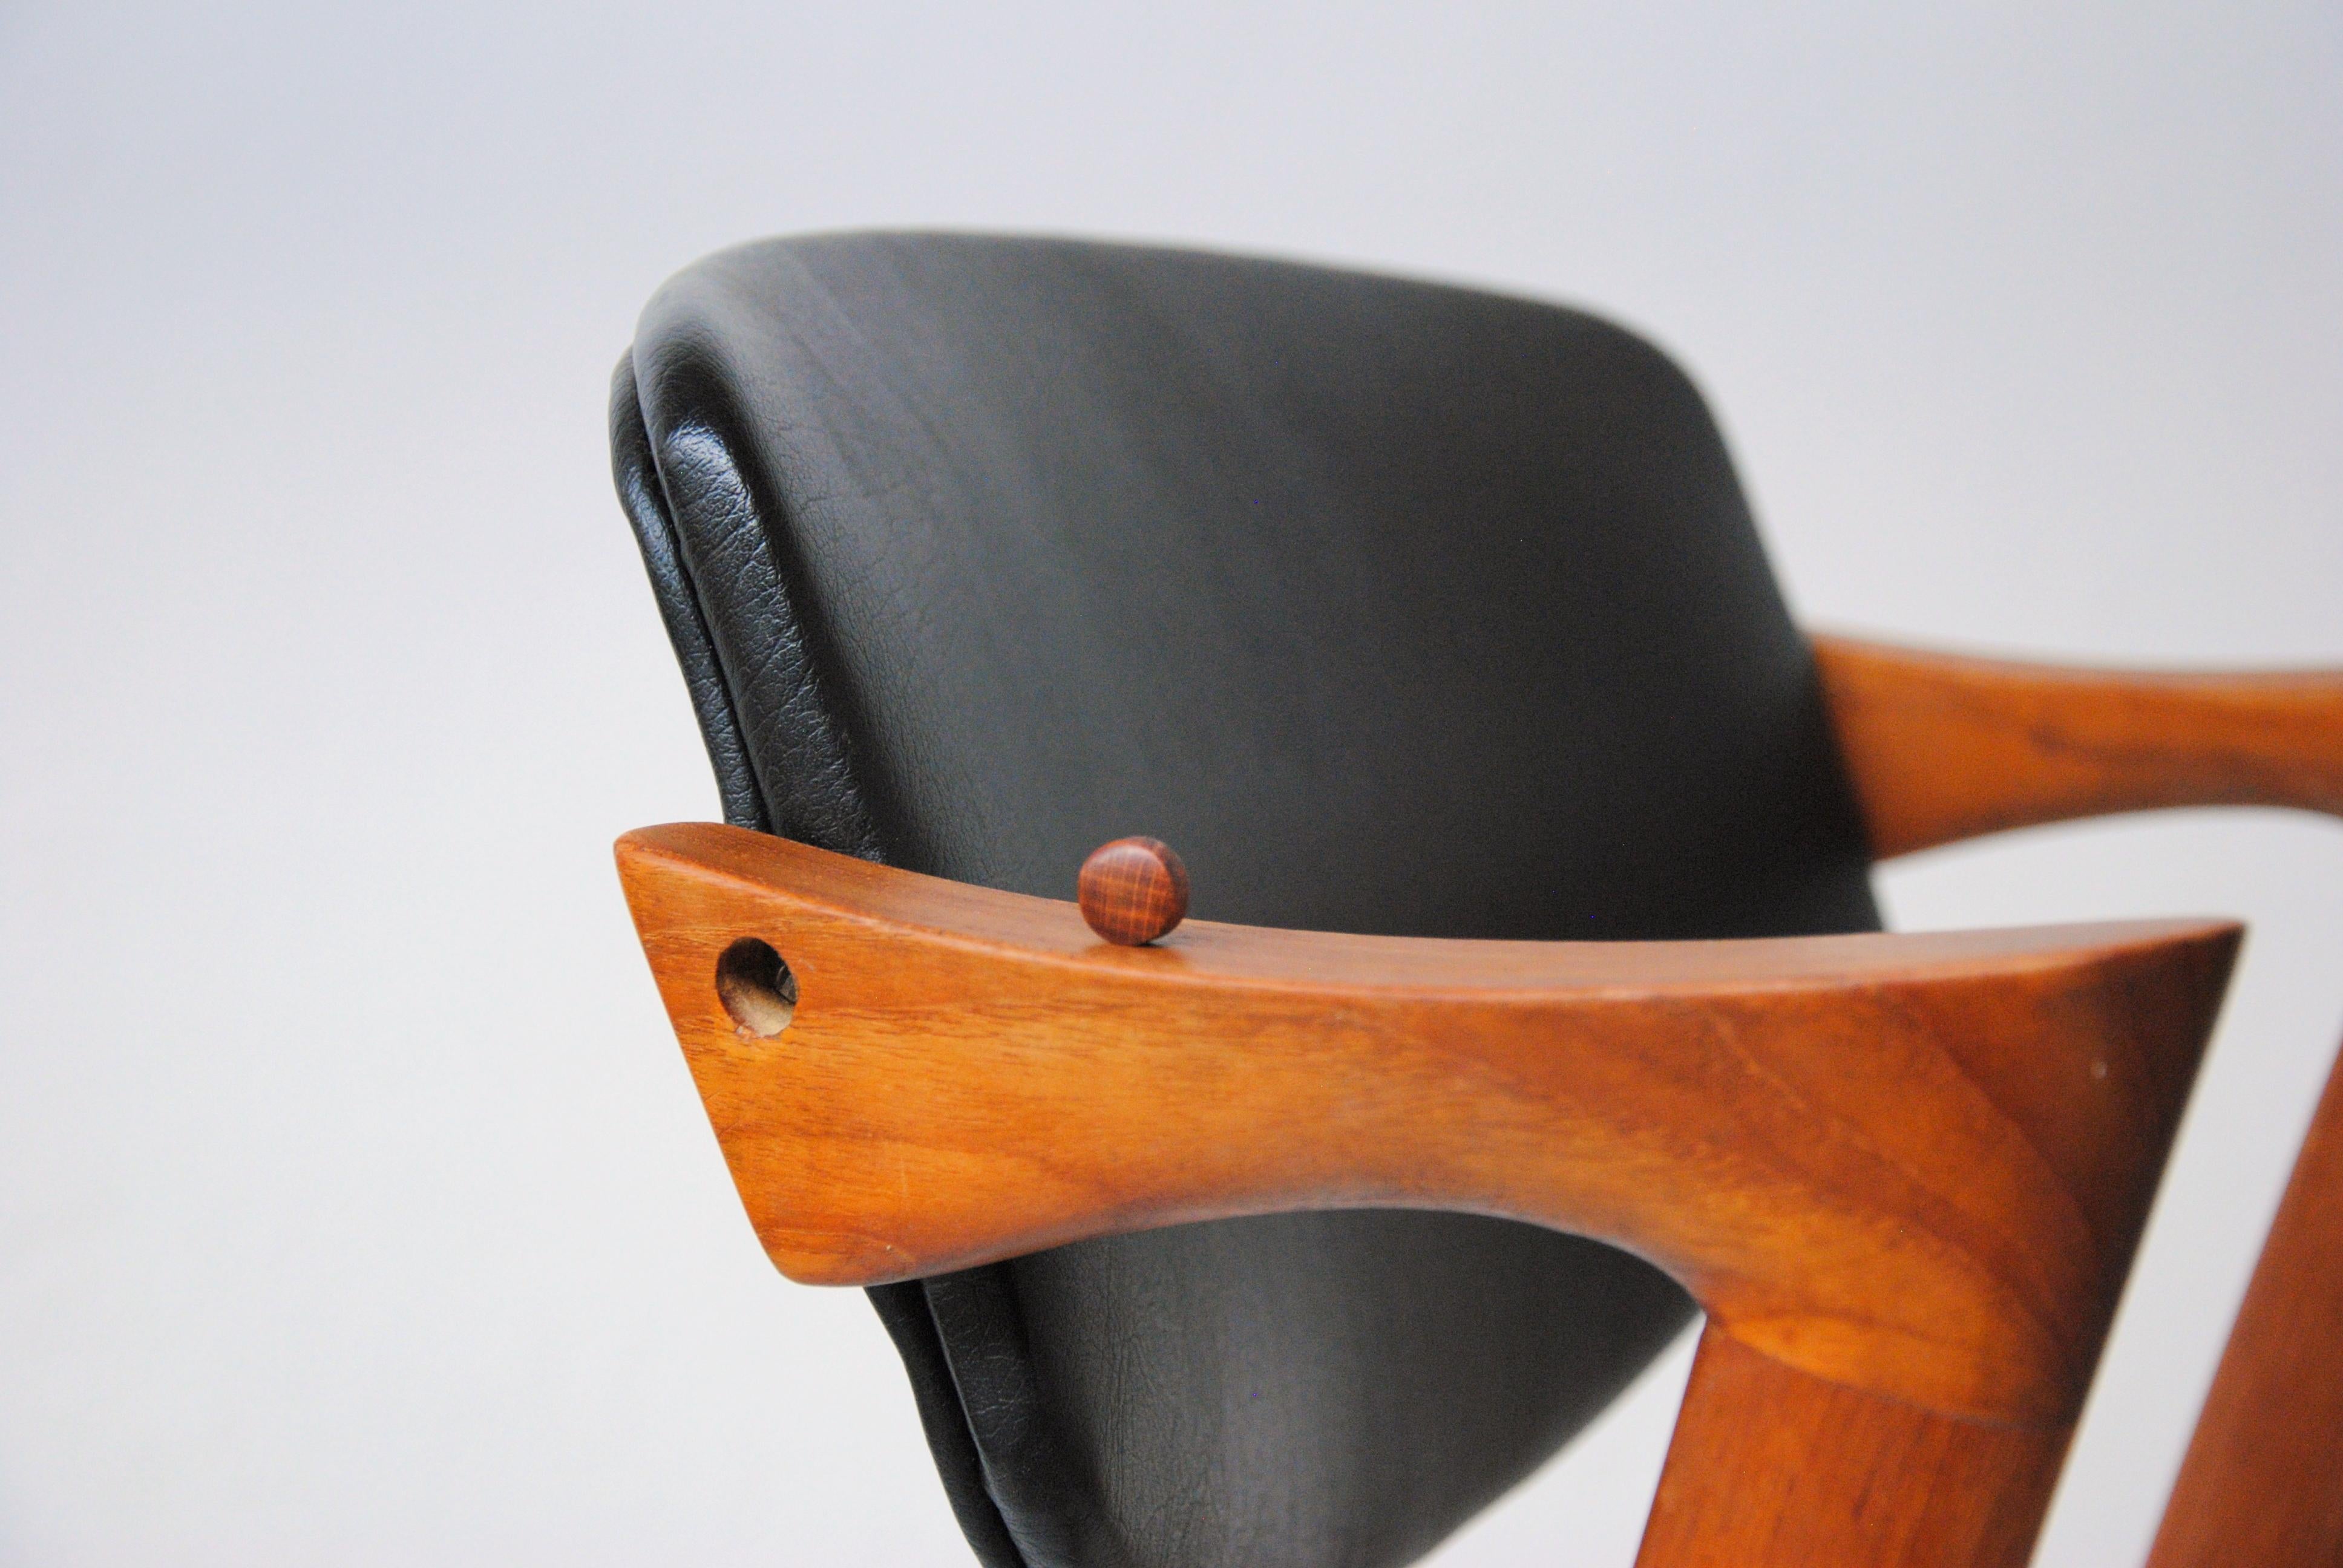 Set of 25 button plugs for the Kai Kristiansen model 42 teak dining chair and other dining chairs with similar plug holes.

The button plugs have the original dimensions and shape to ensure that they fit perfectly to the plug holes and are made of